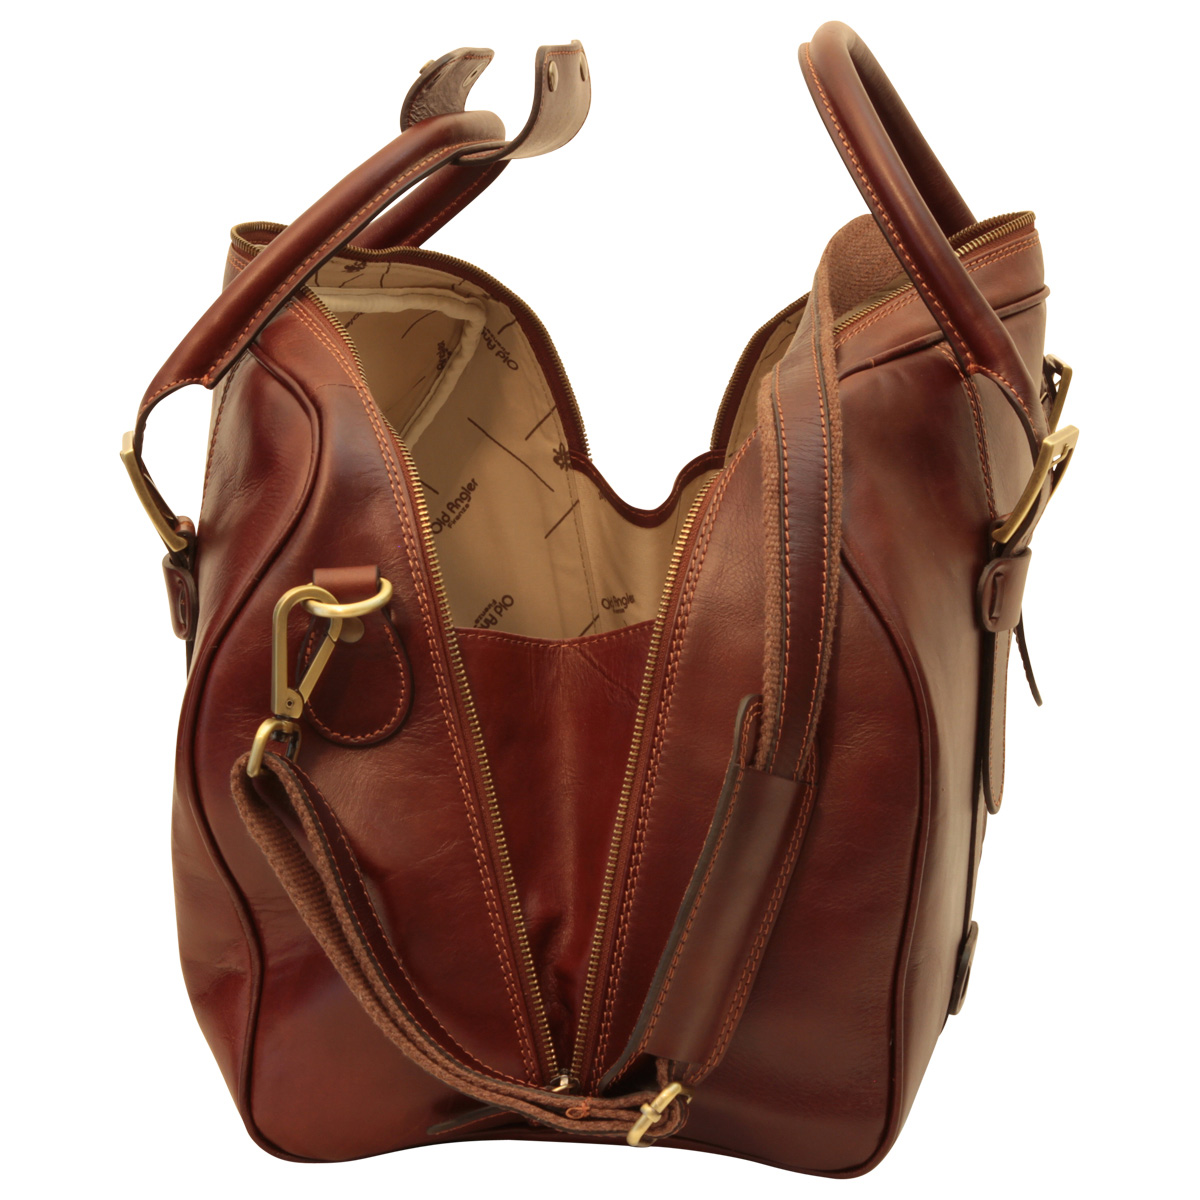 Cowhide leather duffel bag - Brown | 410889MA US | Old Angler Firenze